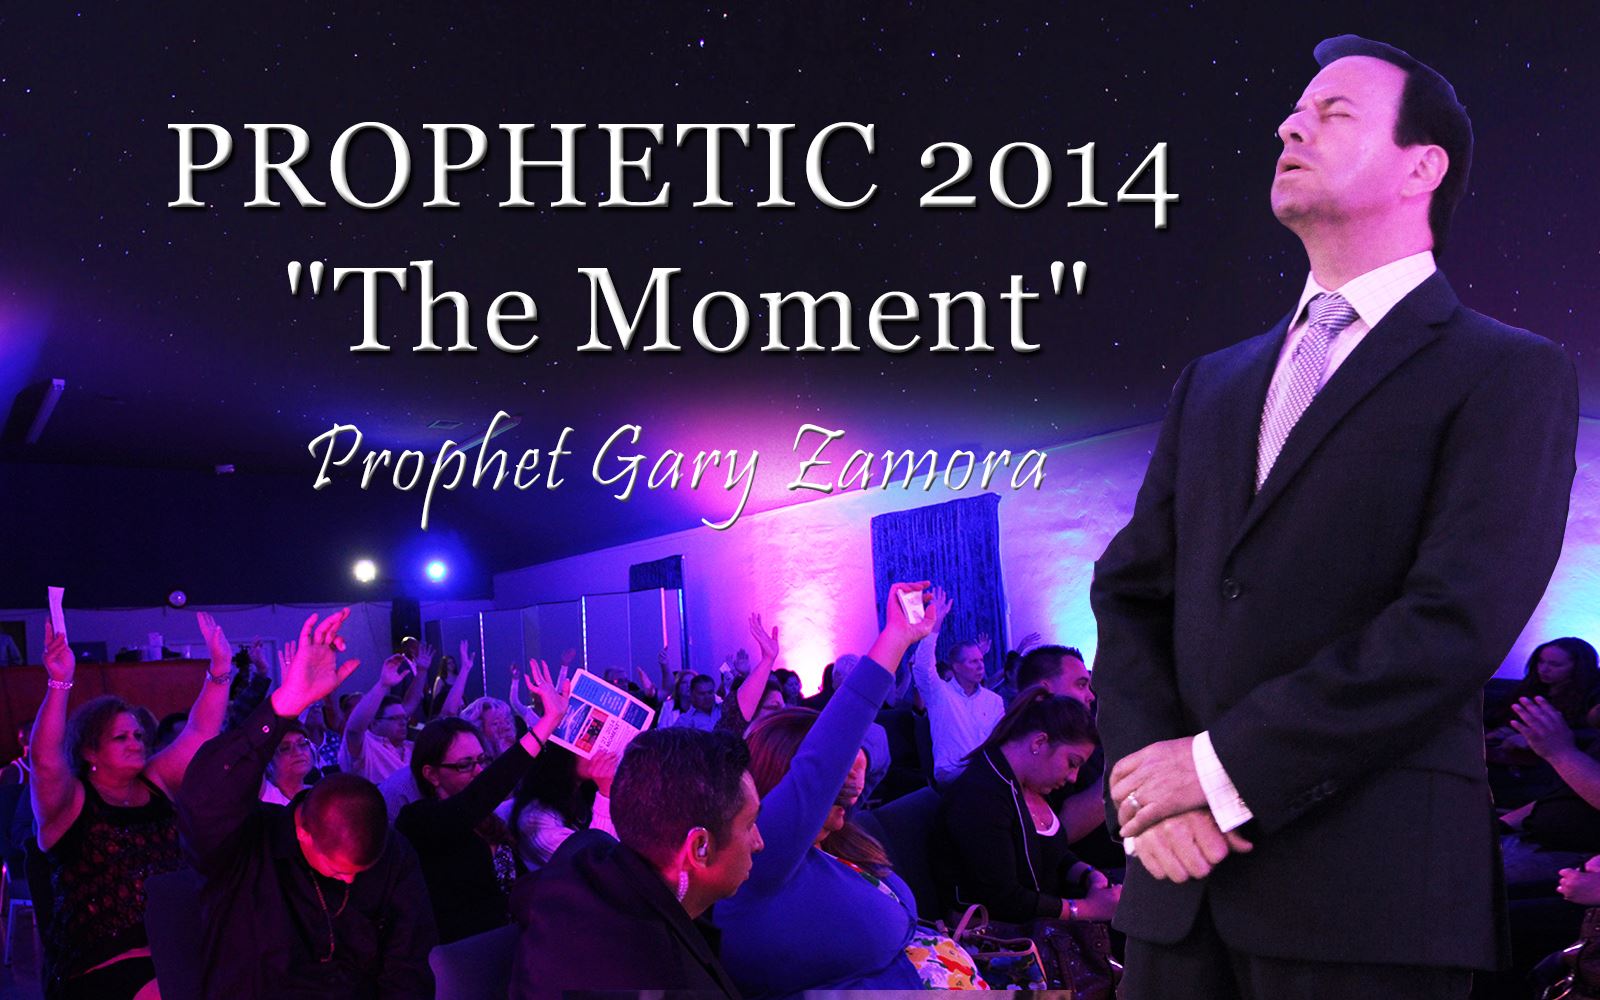 Prophetic 2014 "The Moment"